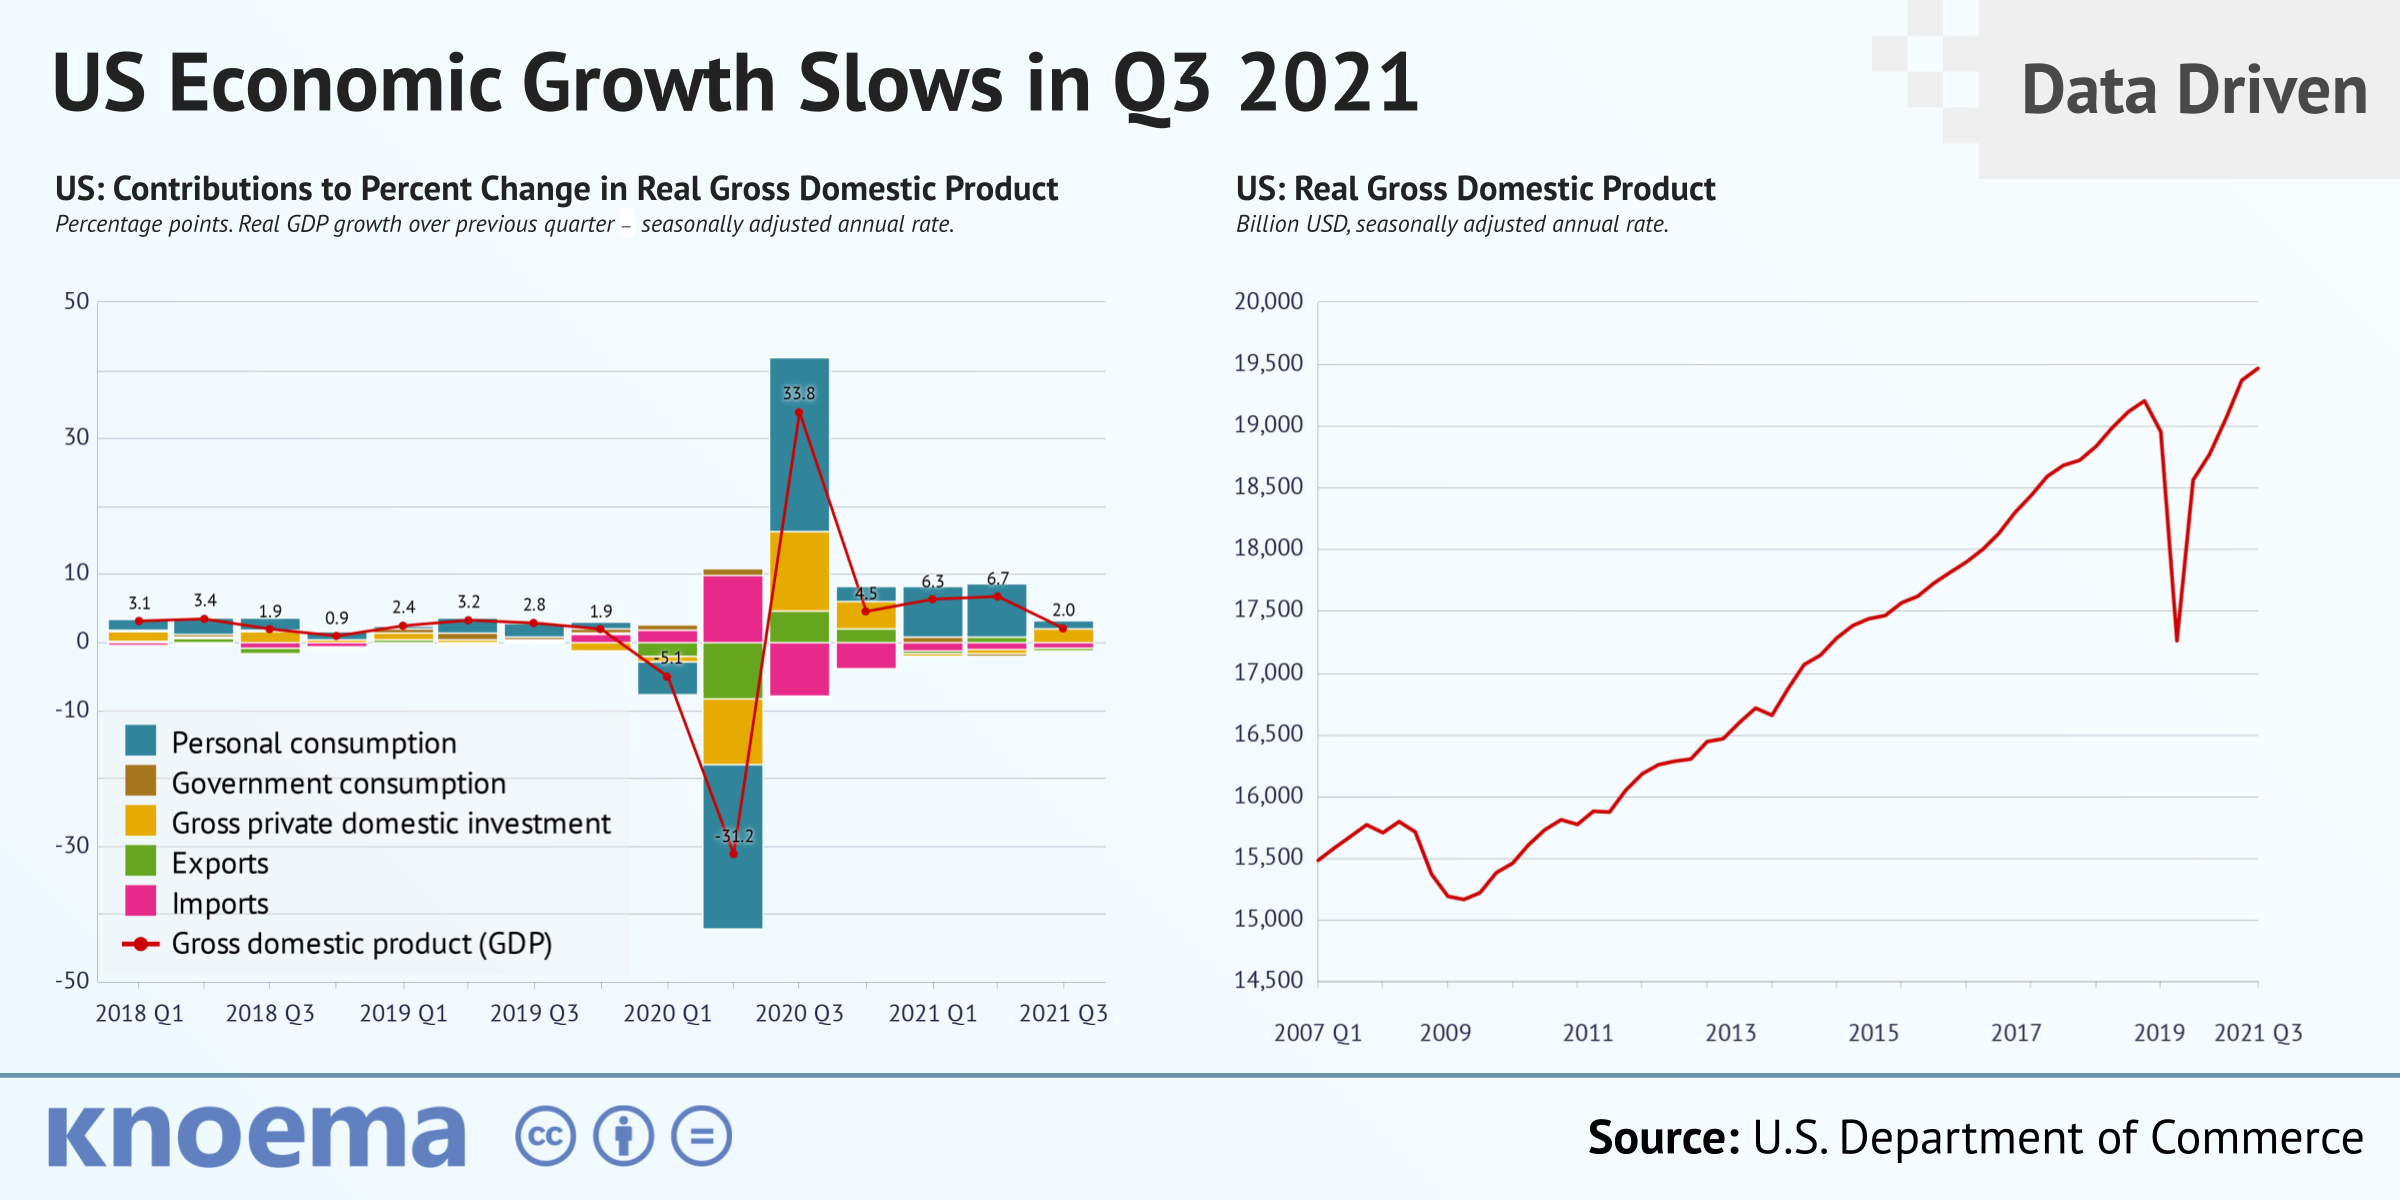 US Economic Growth Slows in Q3 2021